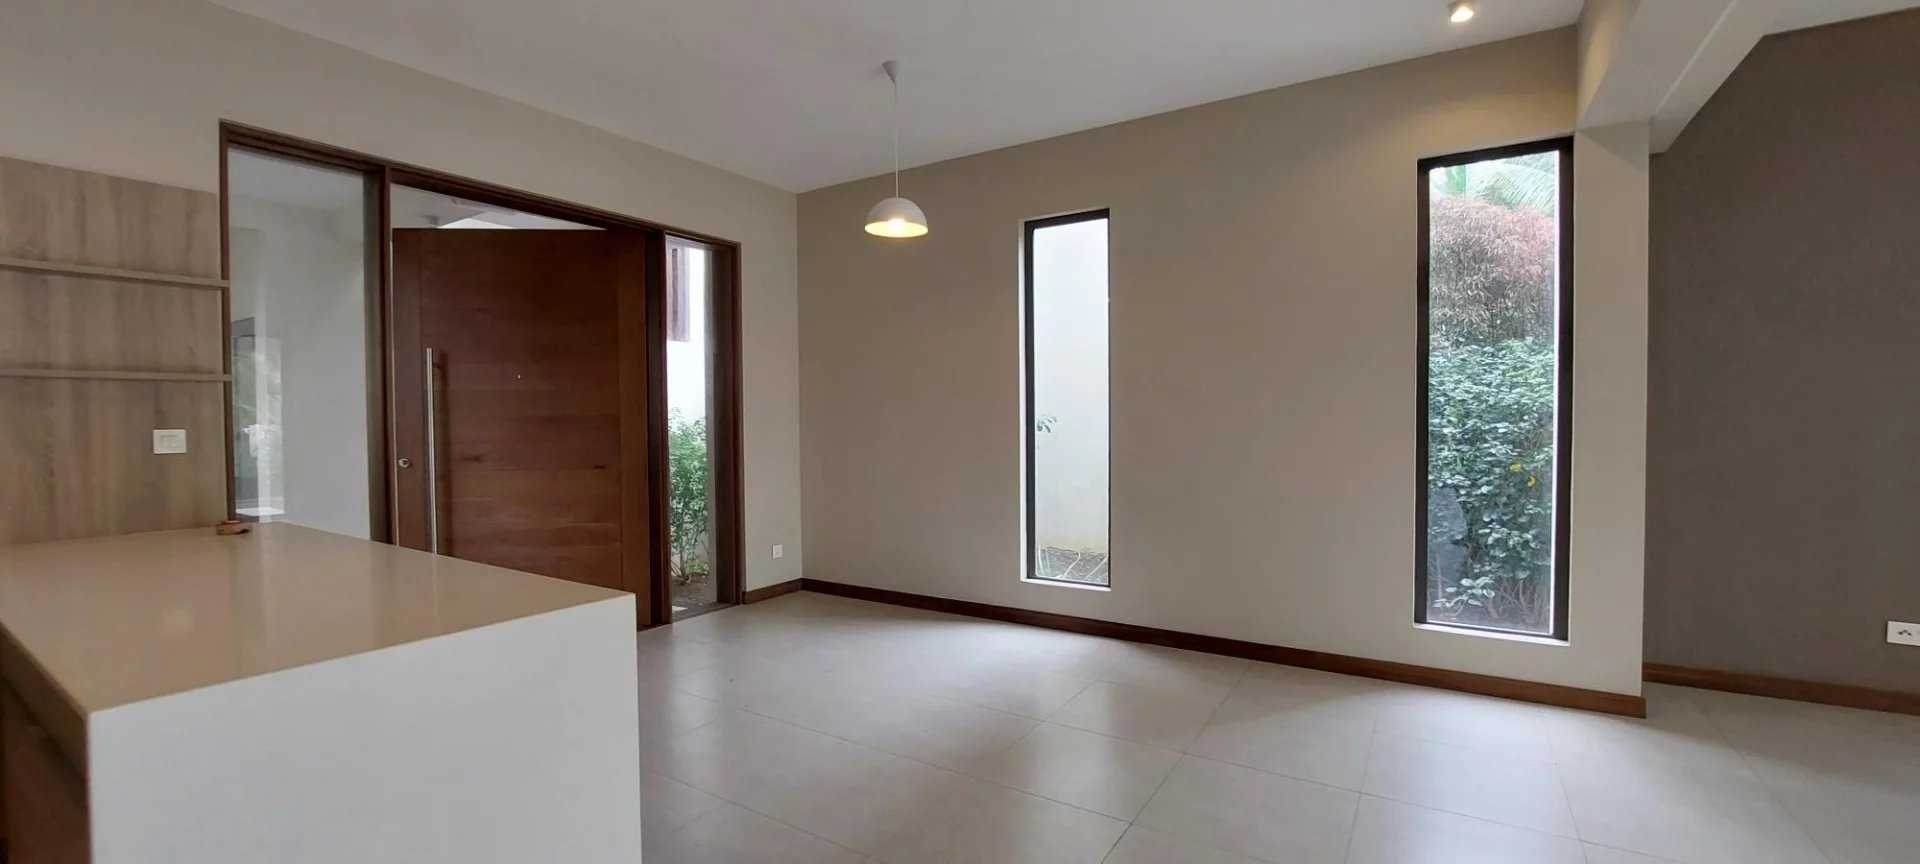 Piso Grand Baie  -  ref 83167123 (picture 3)